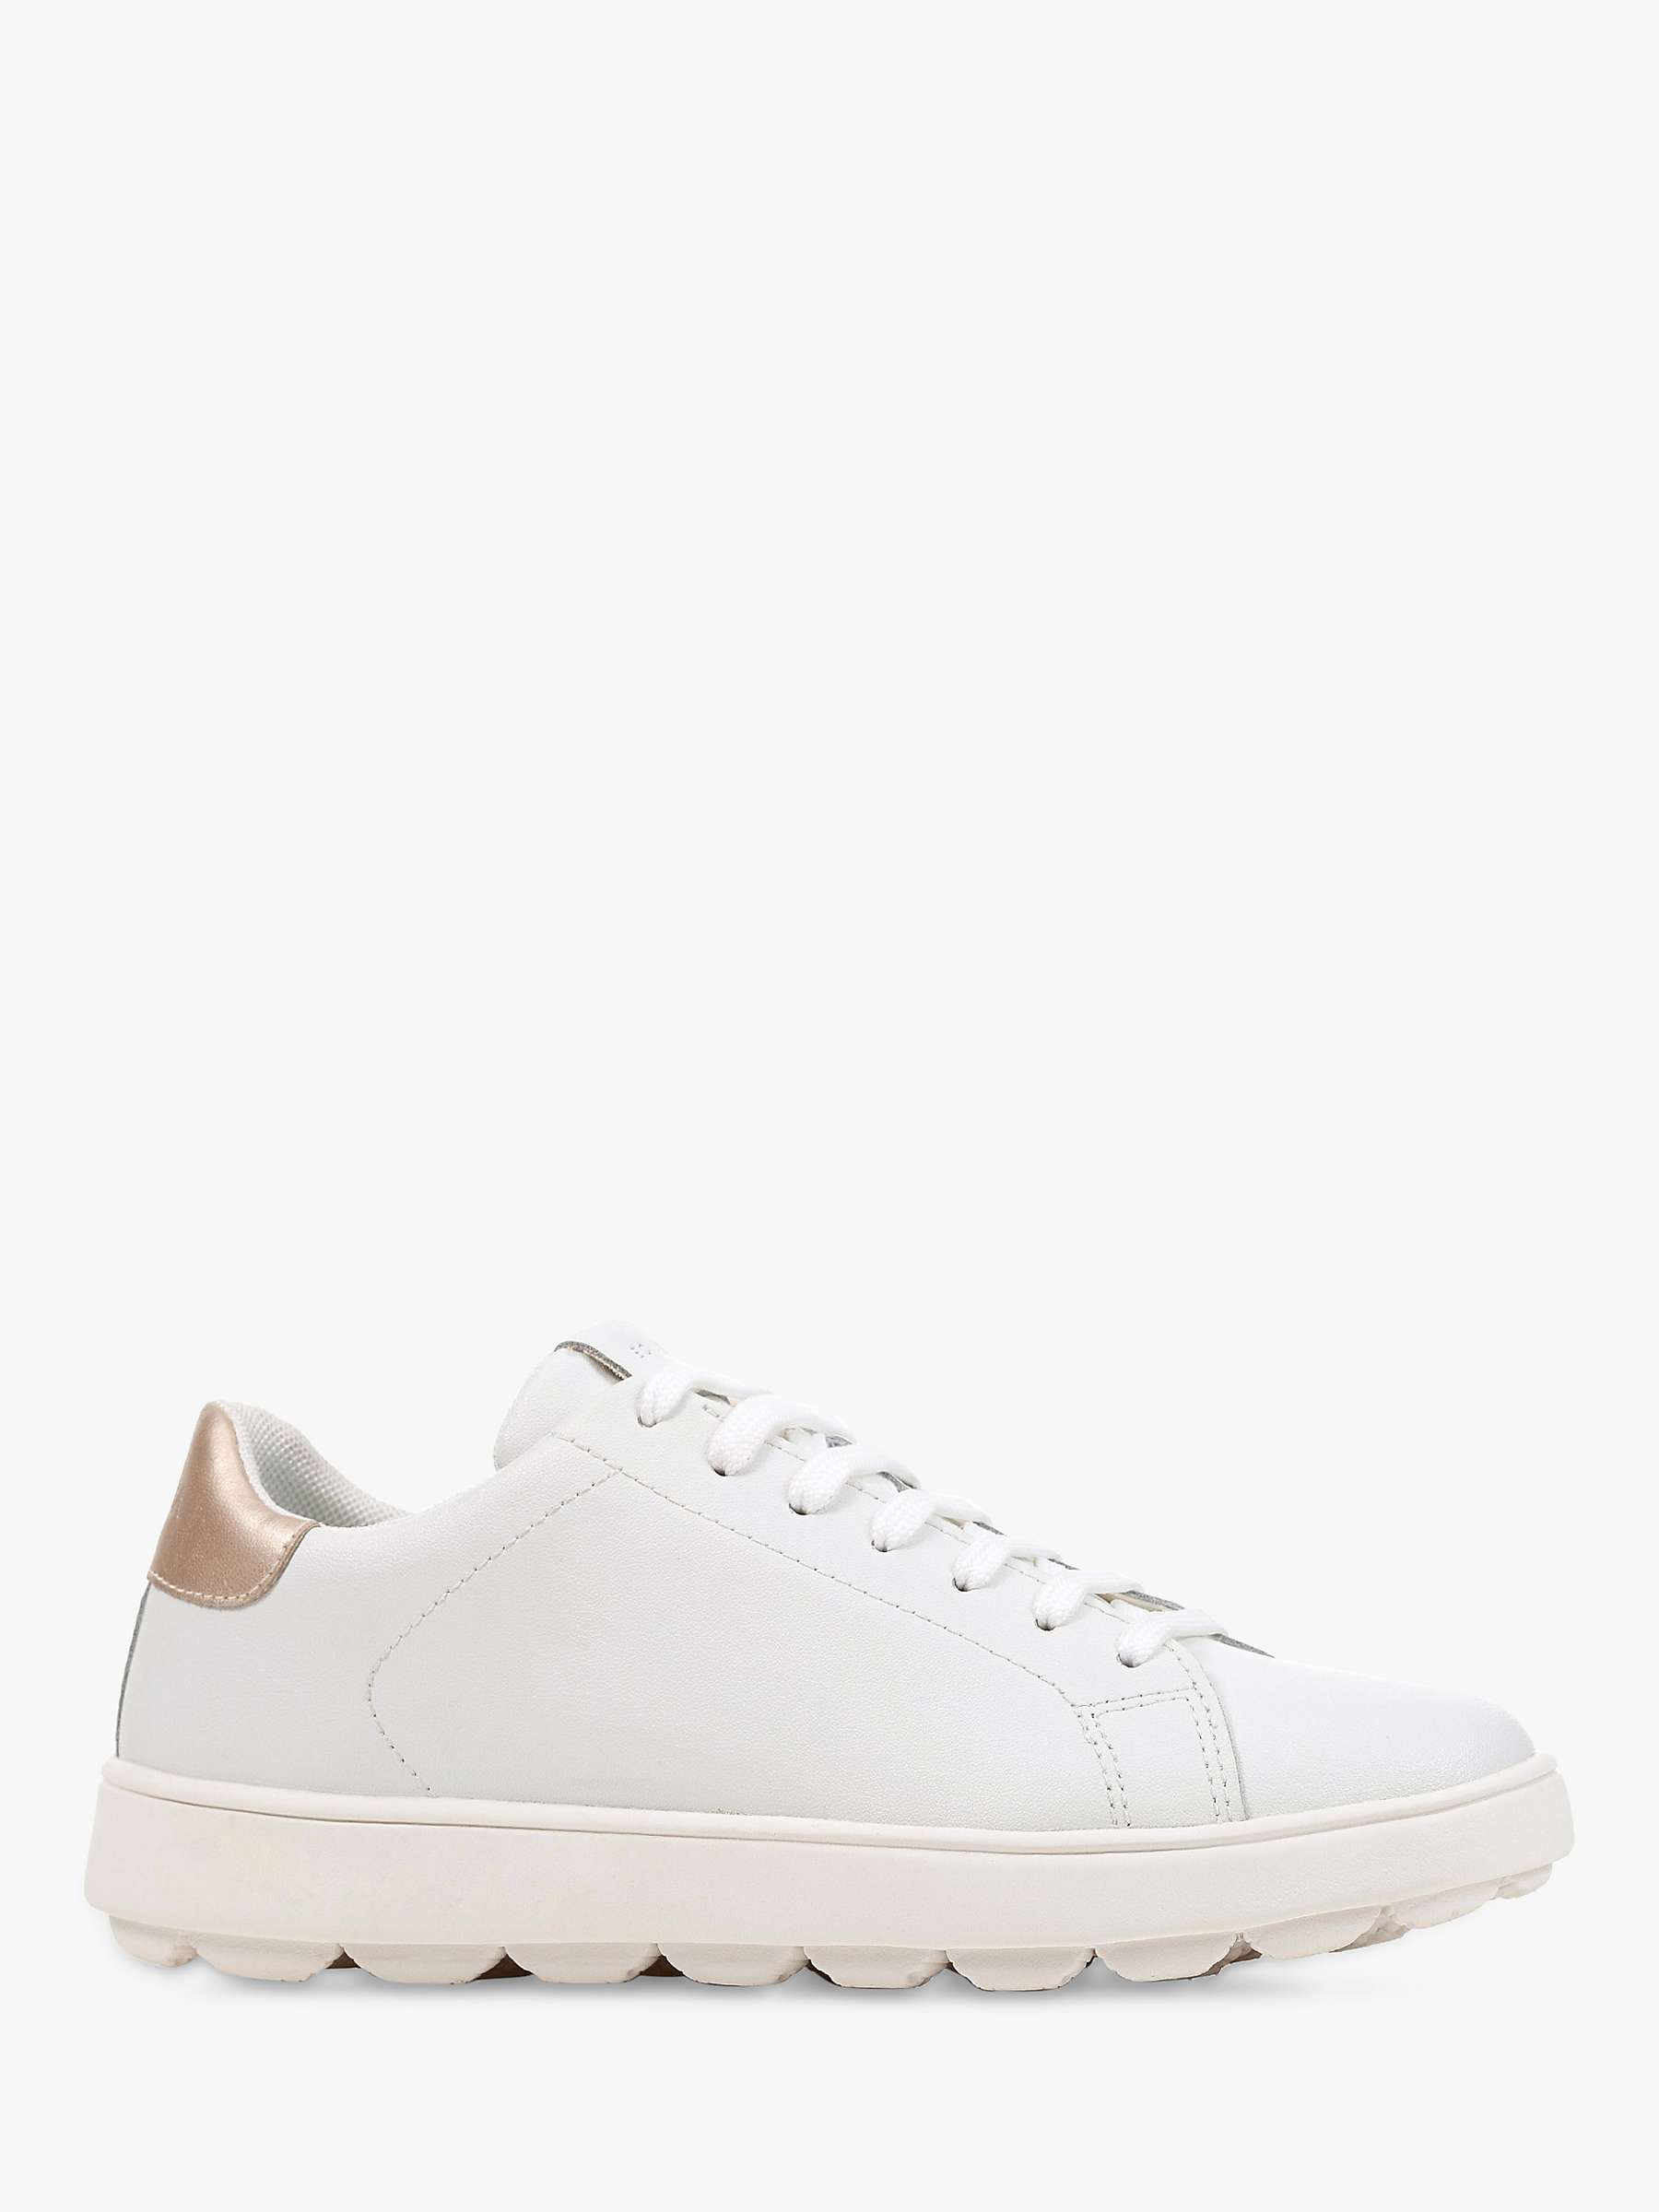 Buy Geox Spherica Ecub-1 Metallic Back Panel Leather Trainers, White/Gold Online at johnlewis.com